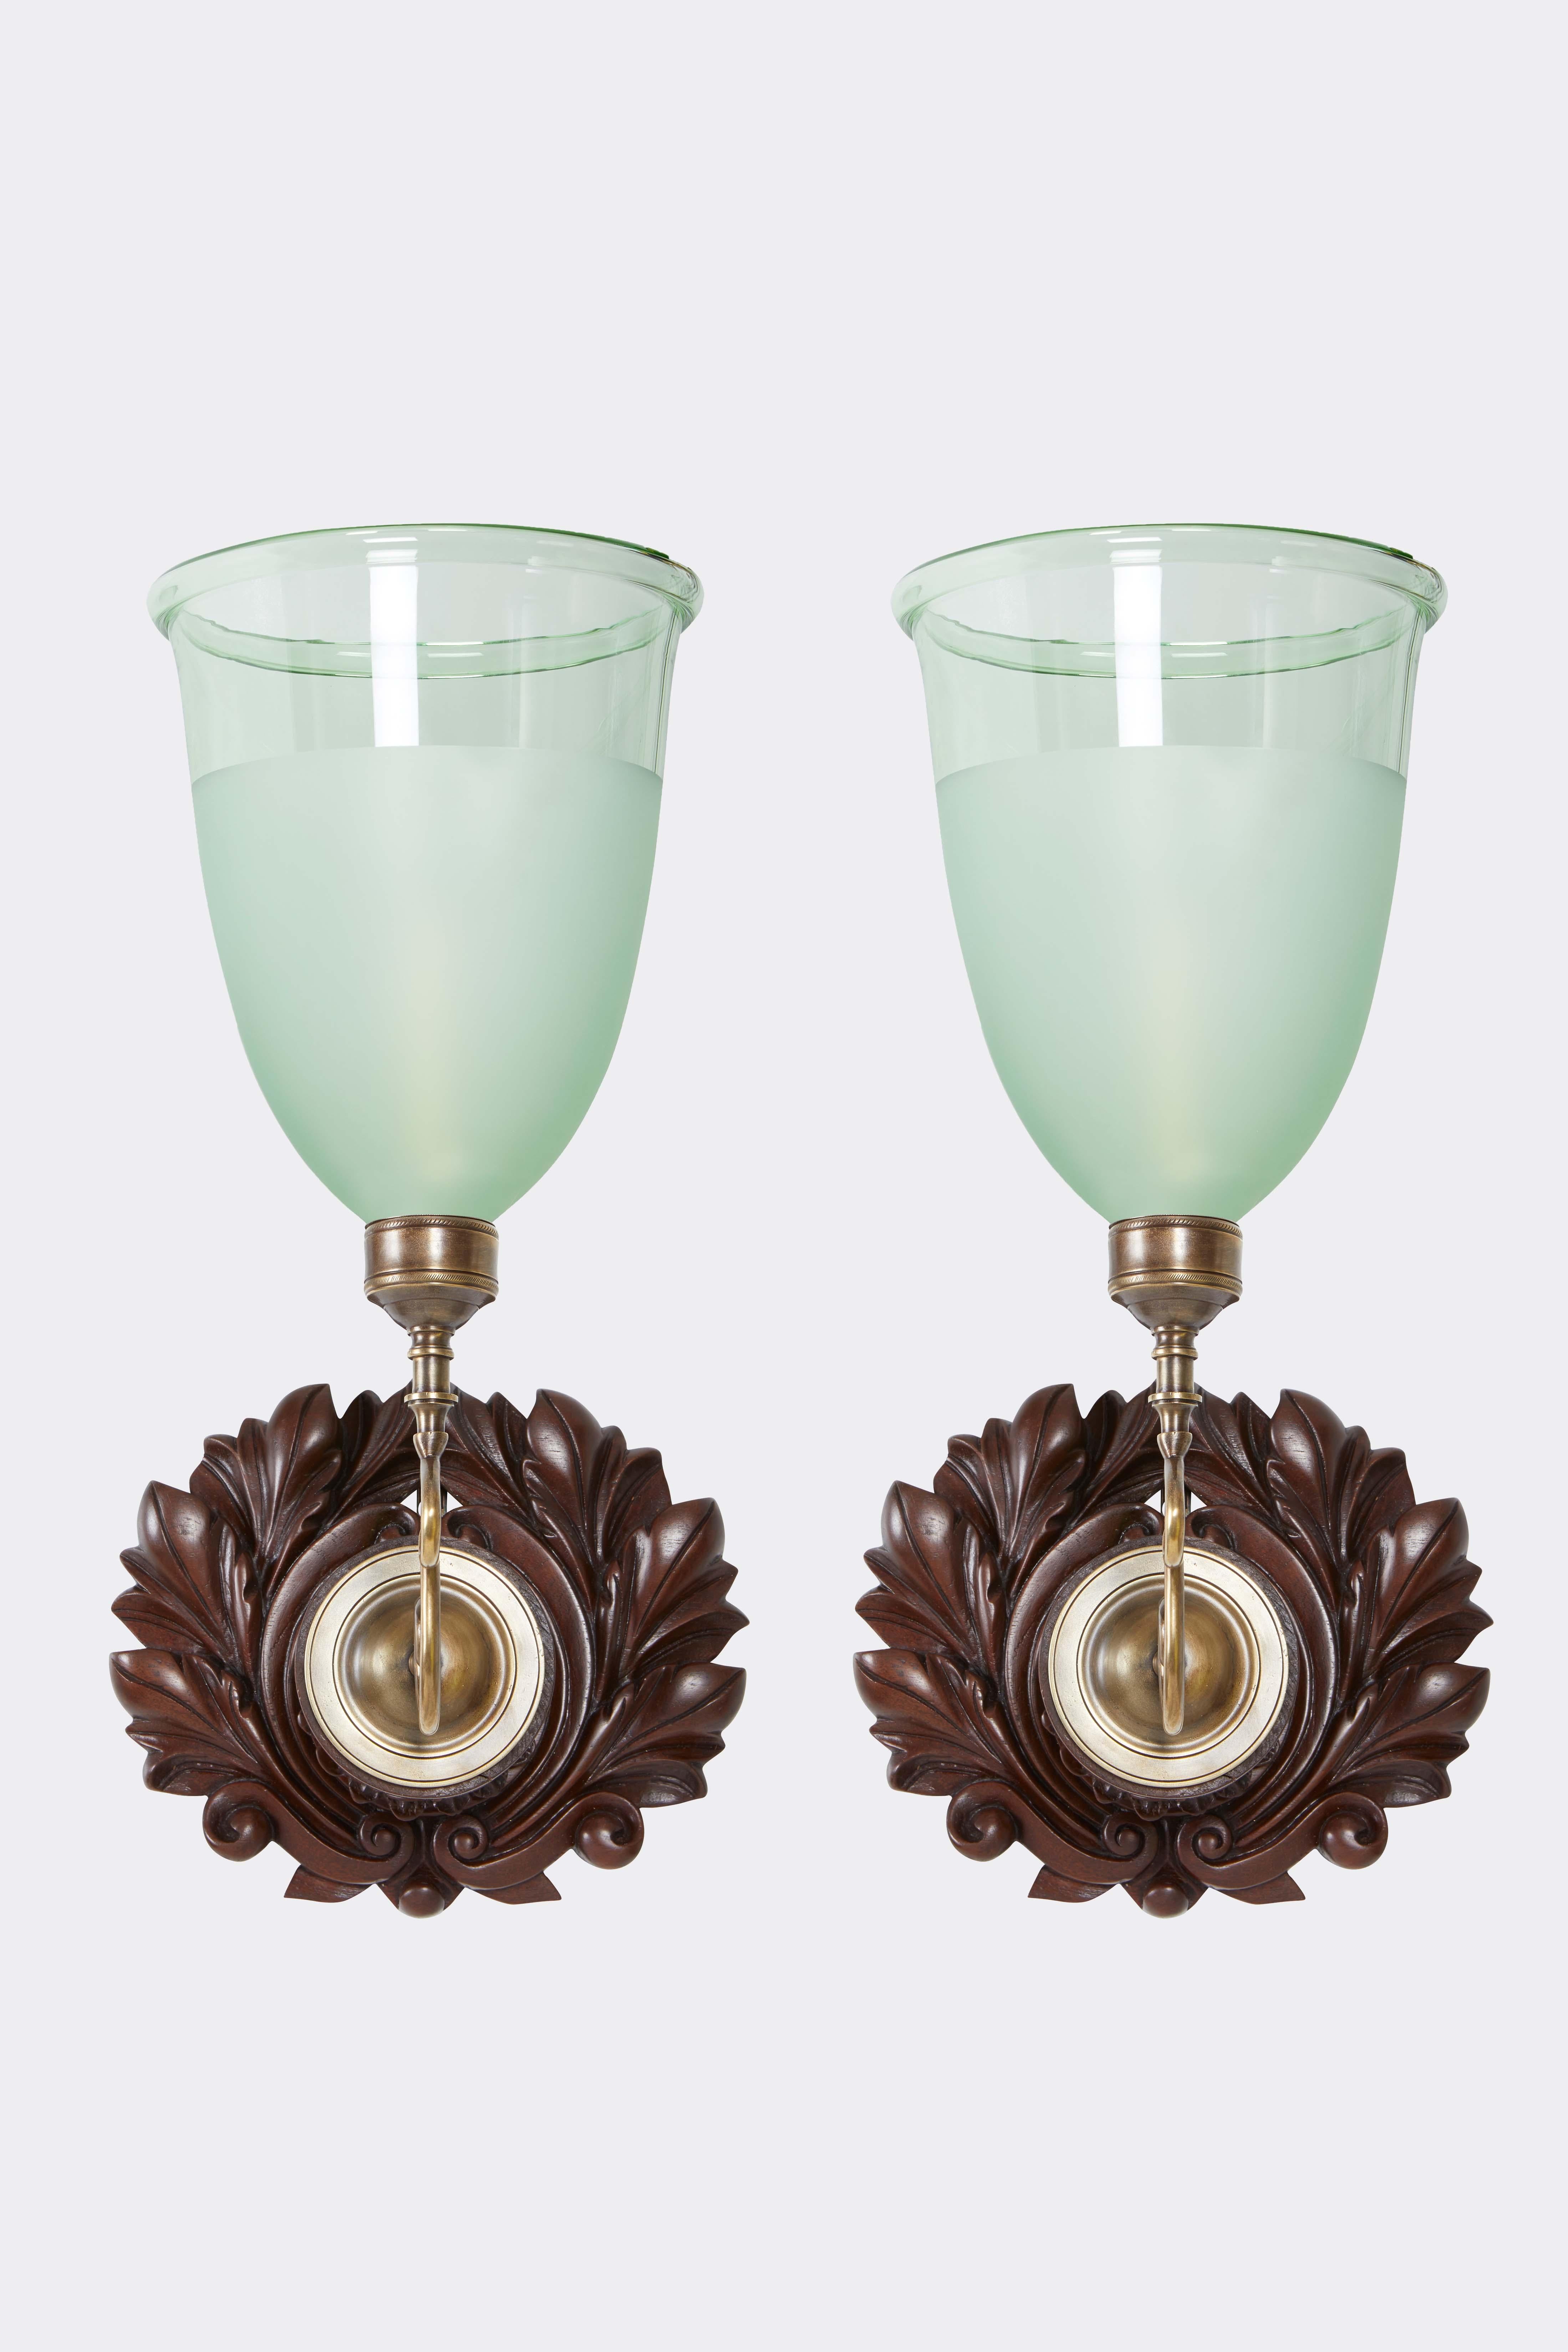 Hand-Carved David Duncan Sconces with Large Wreath backplates and Green Frosted Shades For Sale